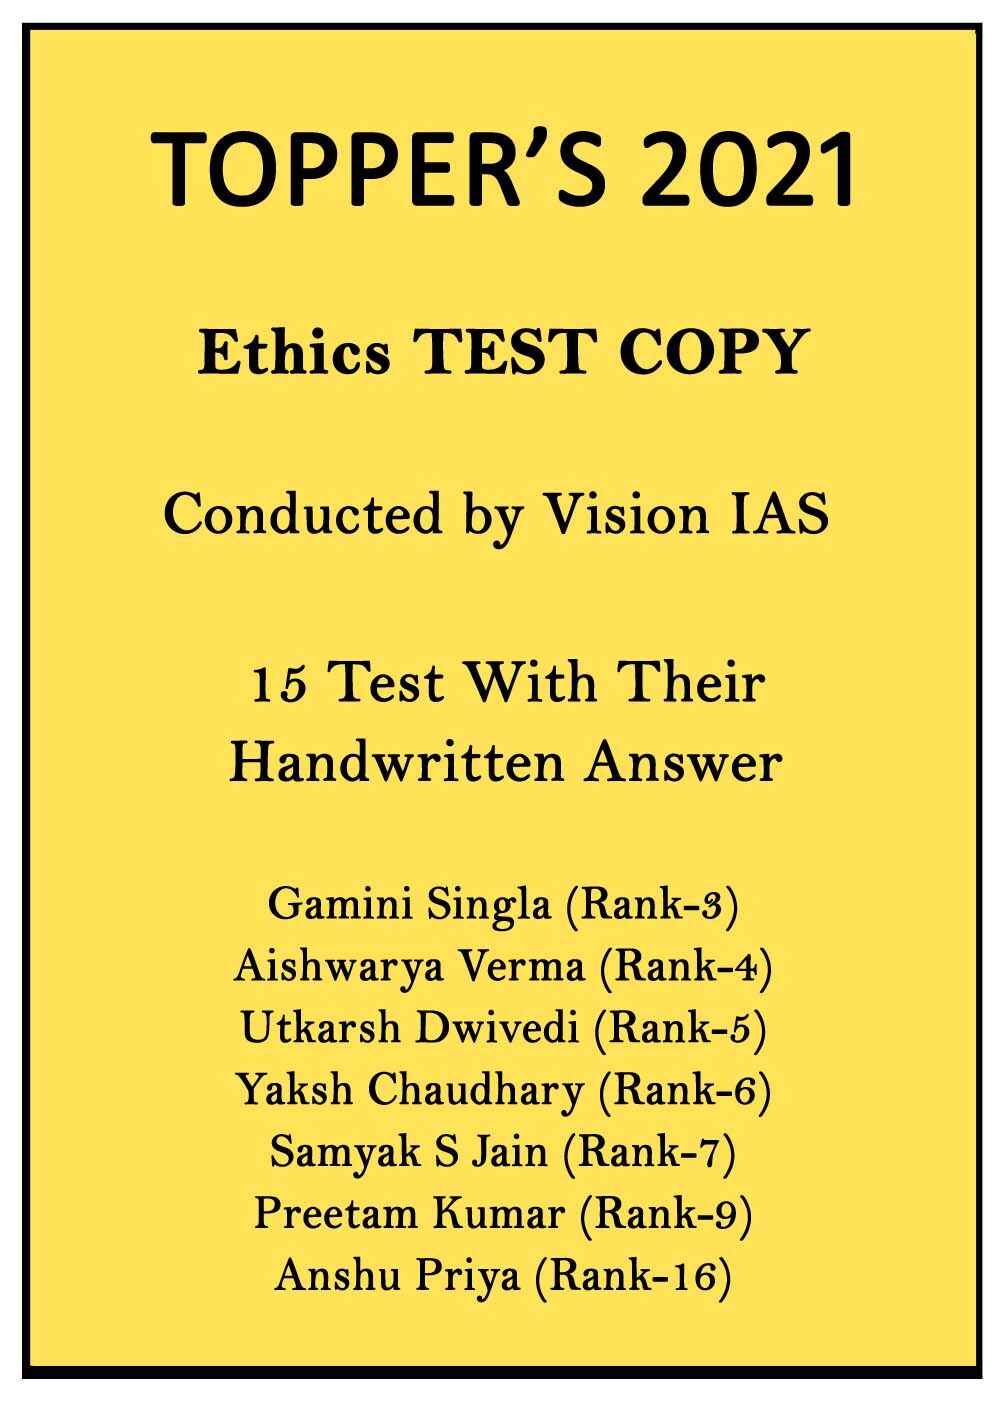 toppers-ethics-handwritten-15-test-copy-notes-by-vision-ias-in-english-for-mains